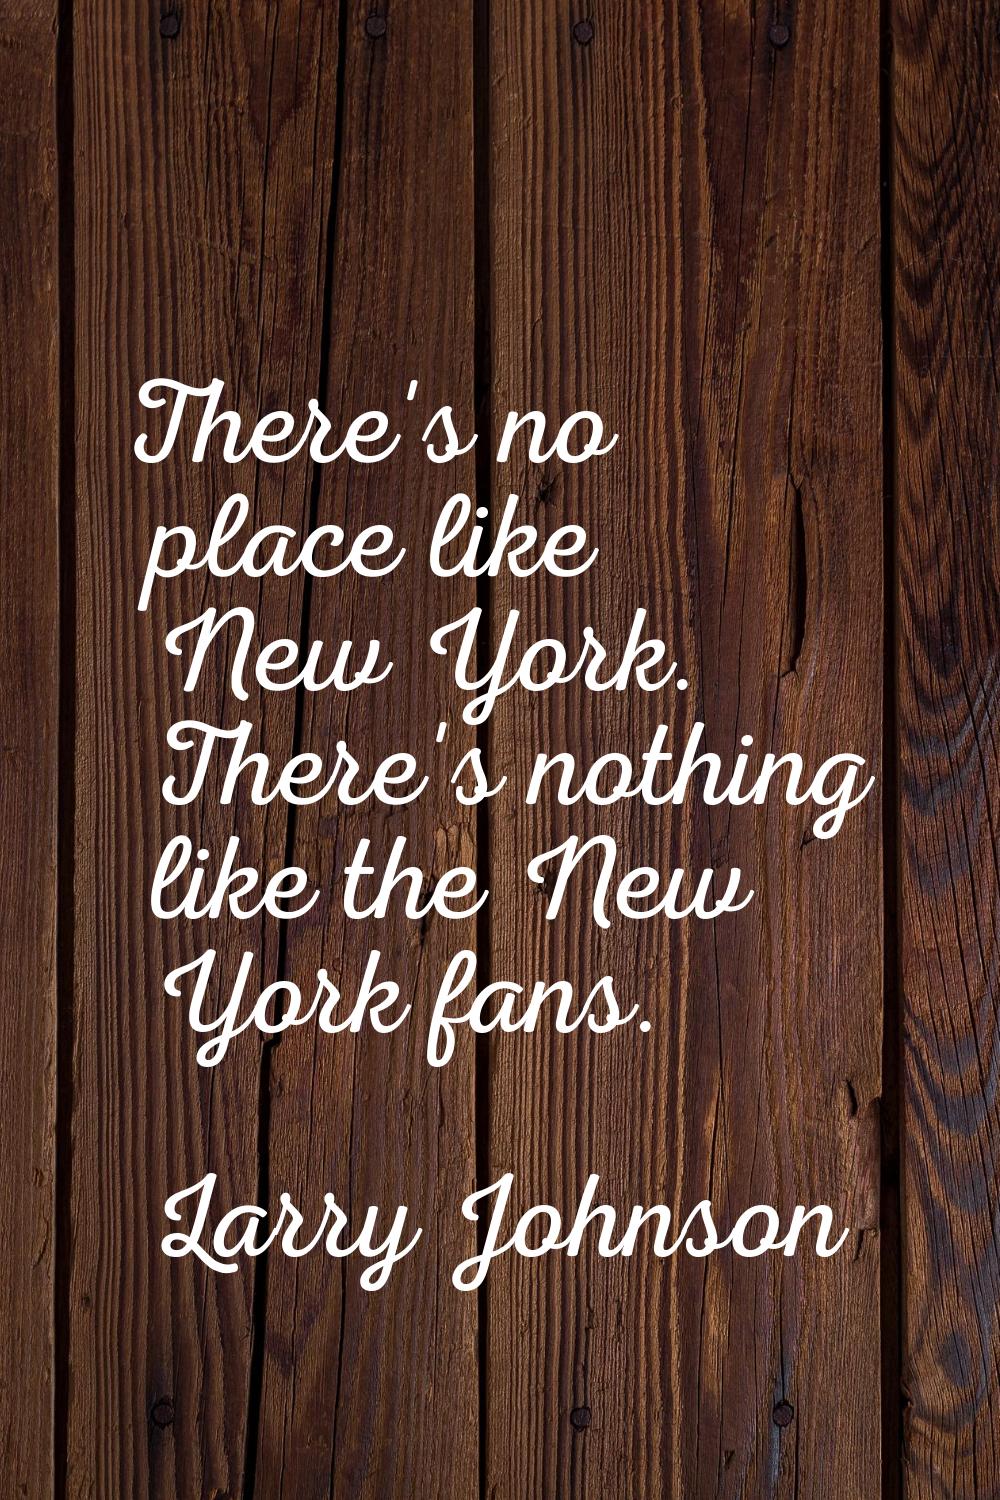 There's no place like New York. There's nothing like the New York fans.